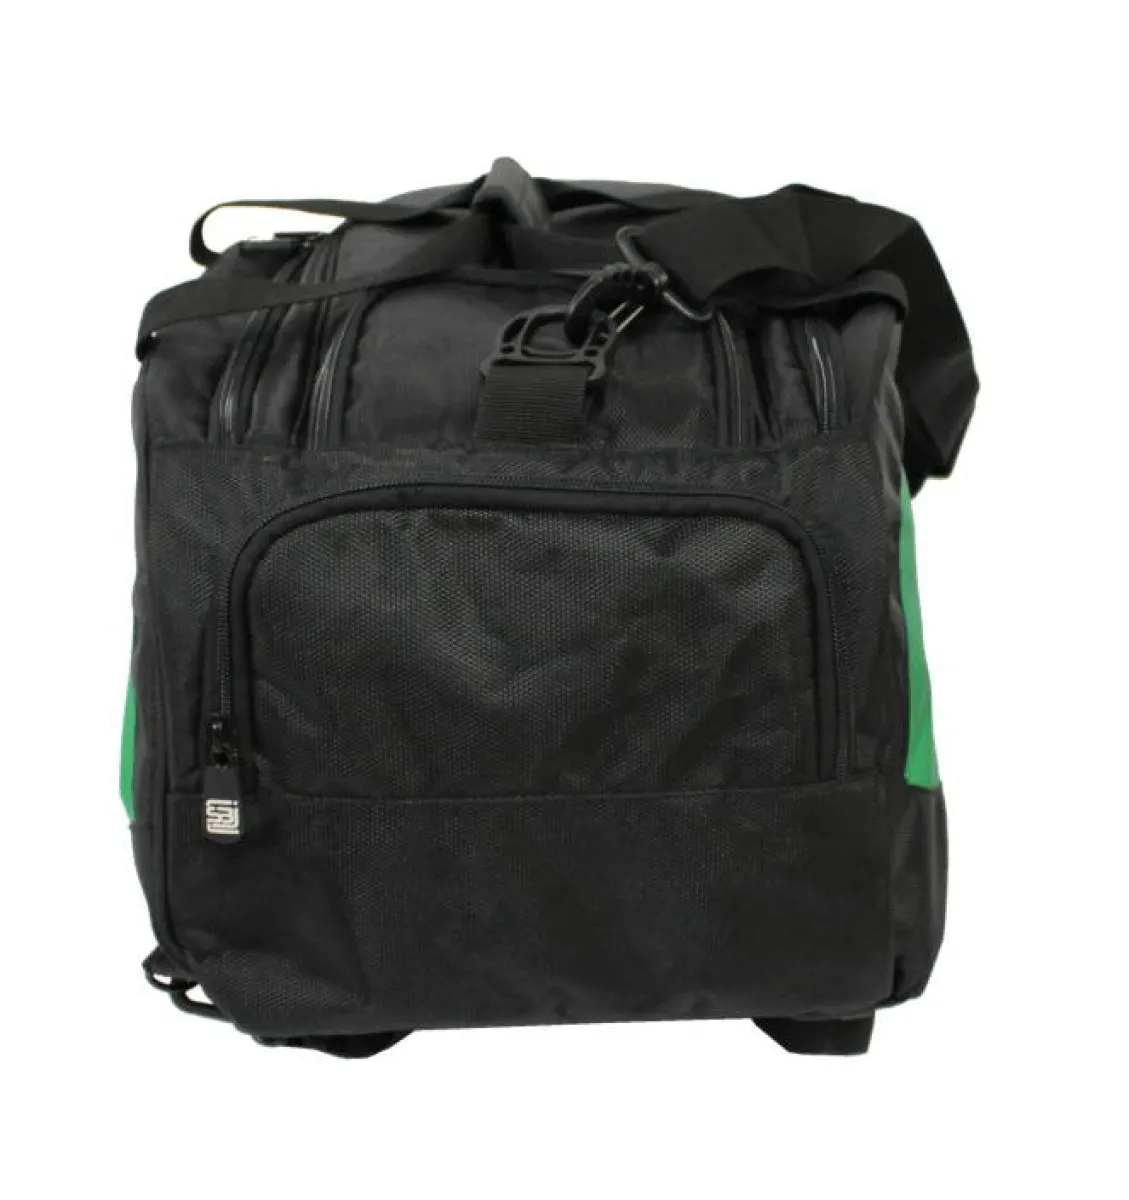 Sports bag with rucksack function in black with green side inserts